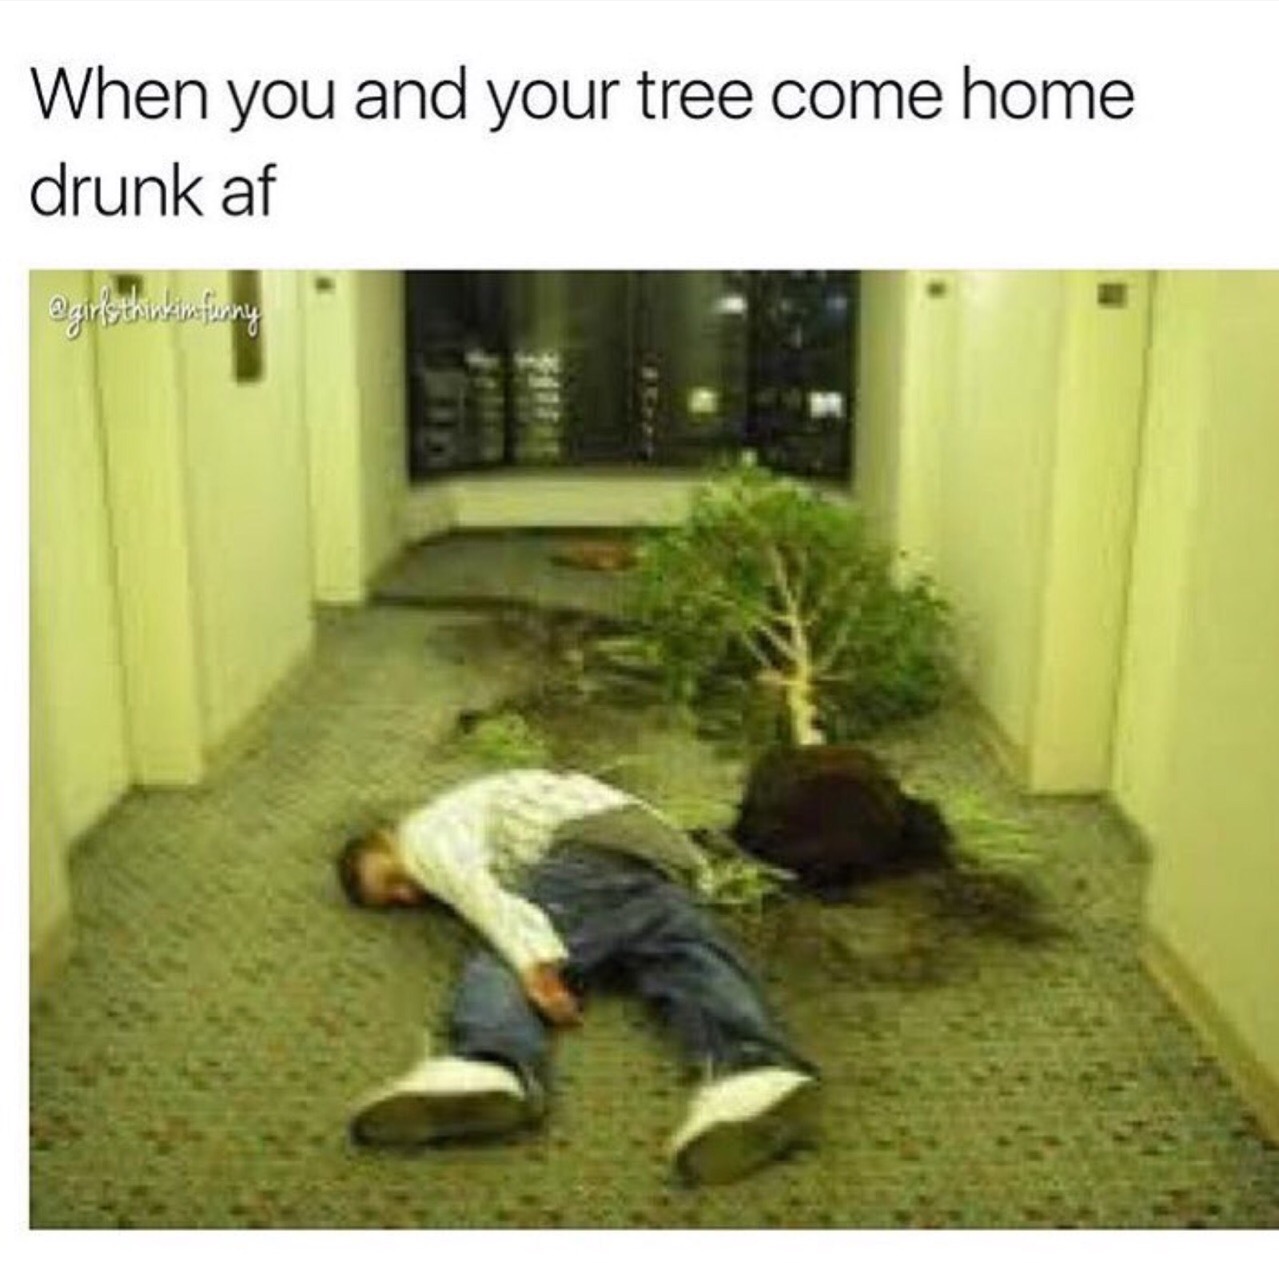 Funny meme about coming home drunk.